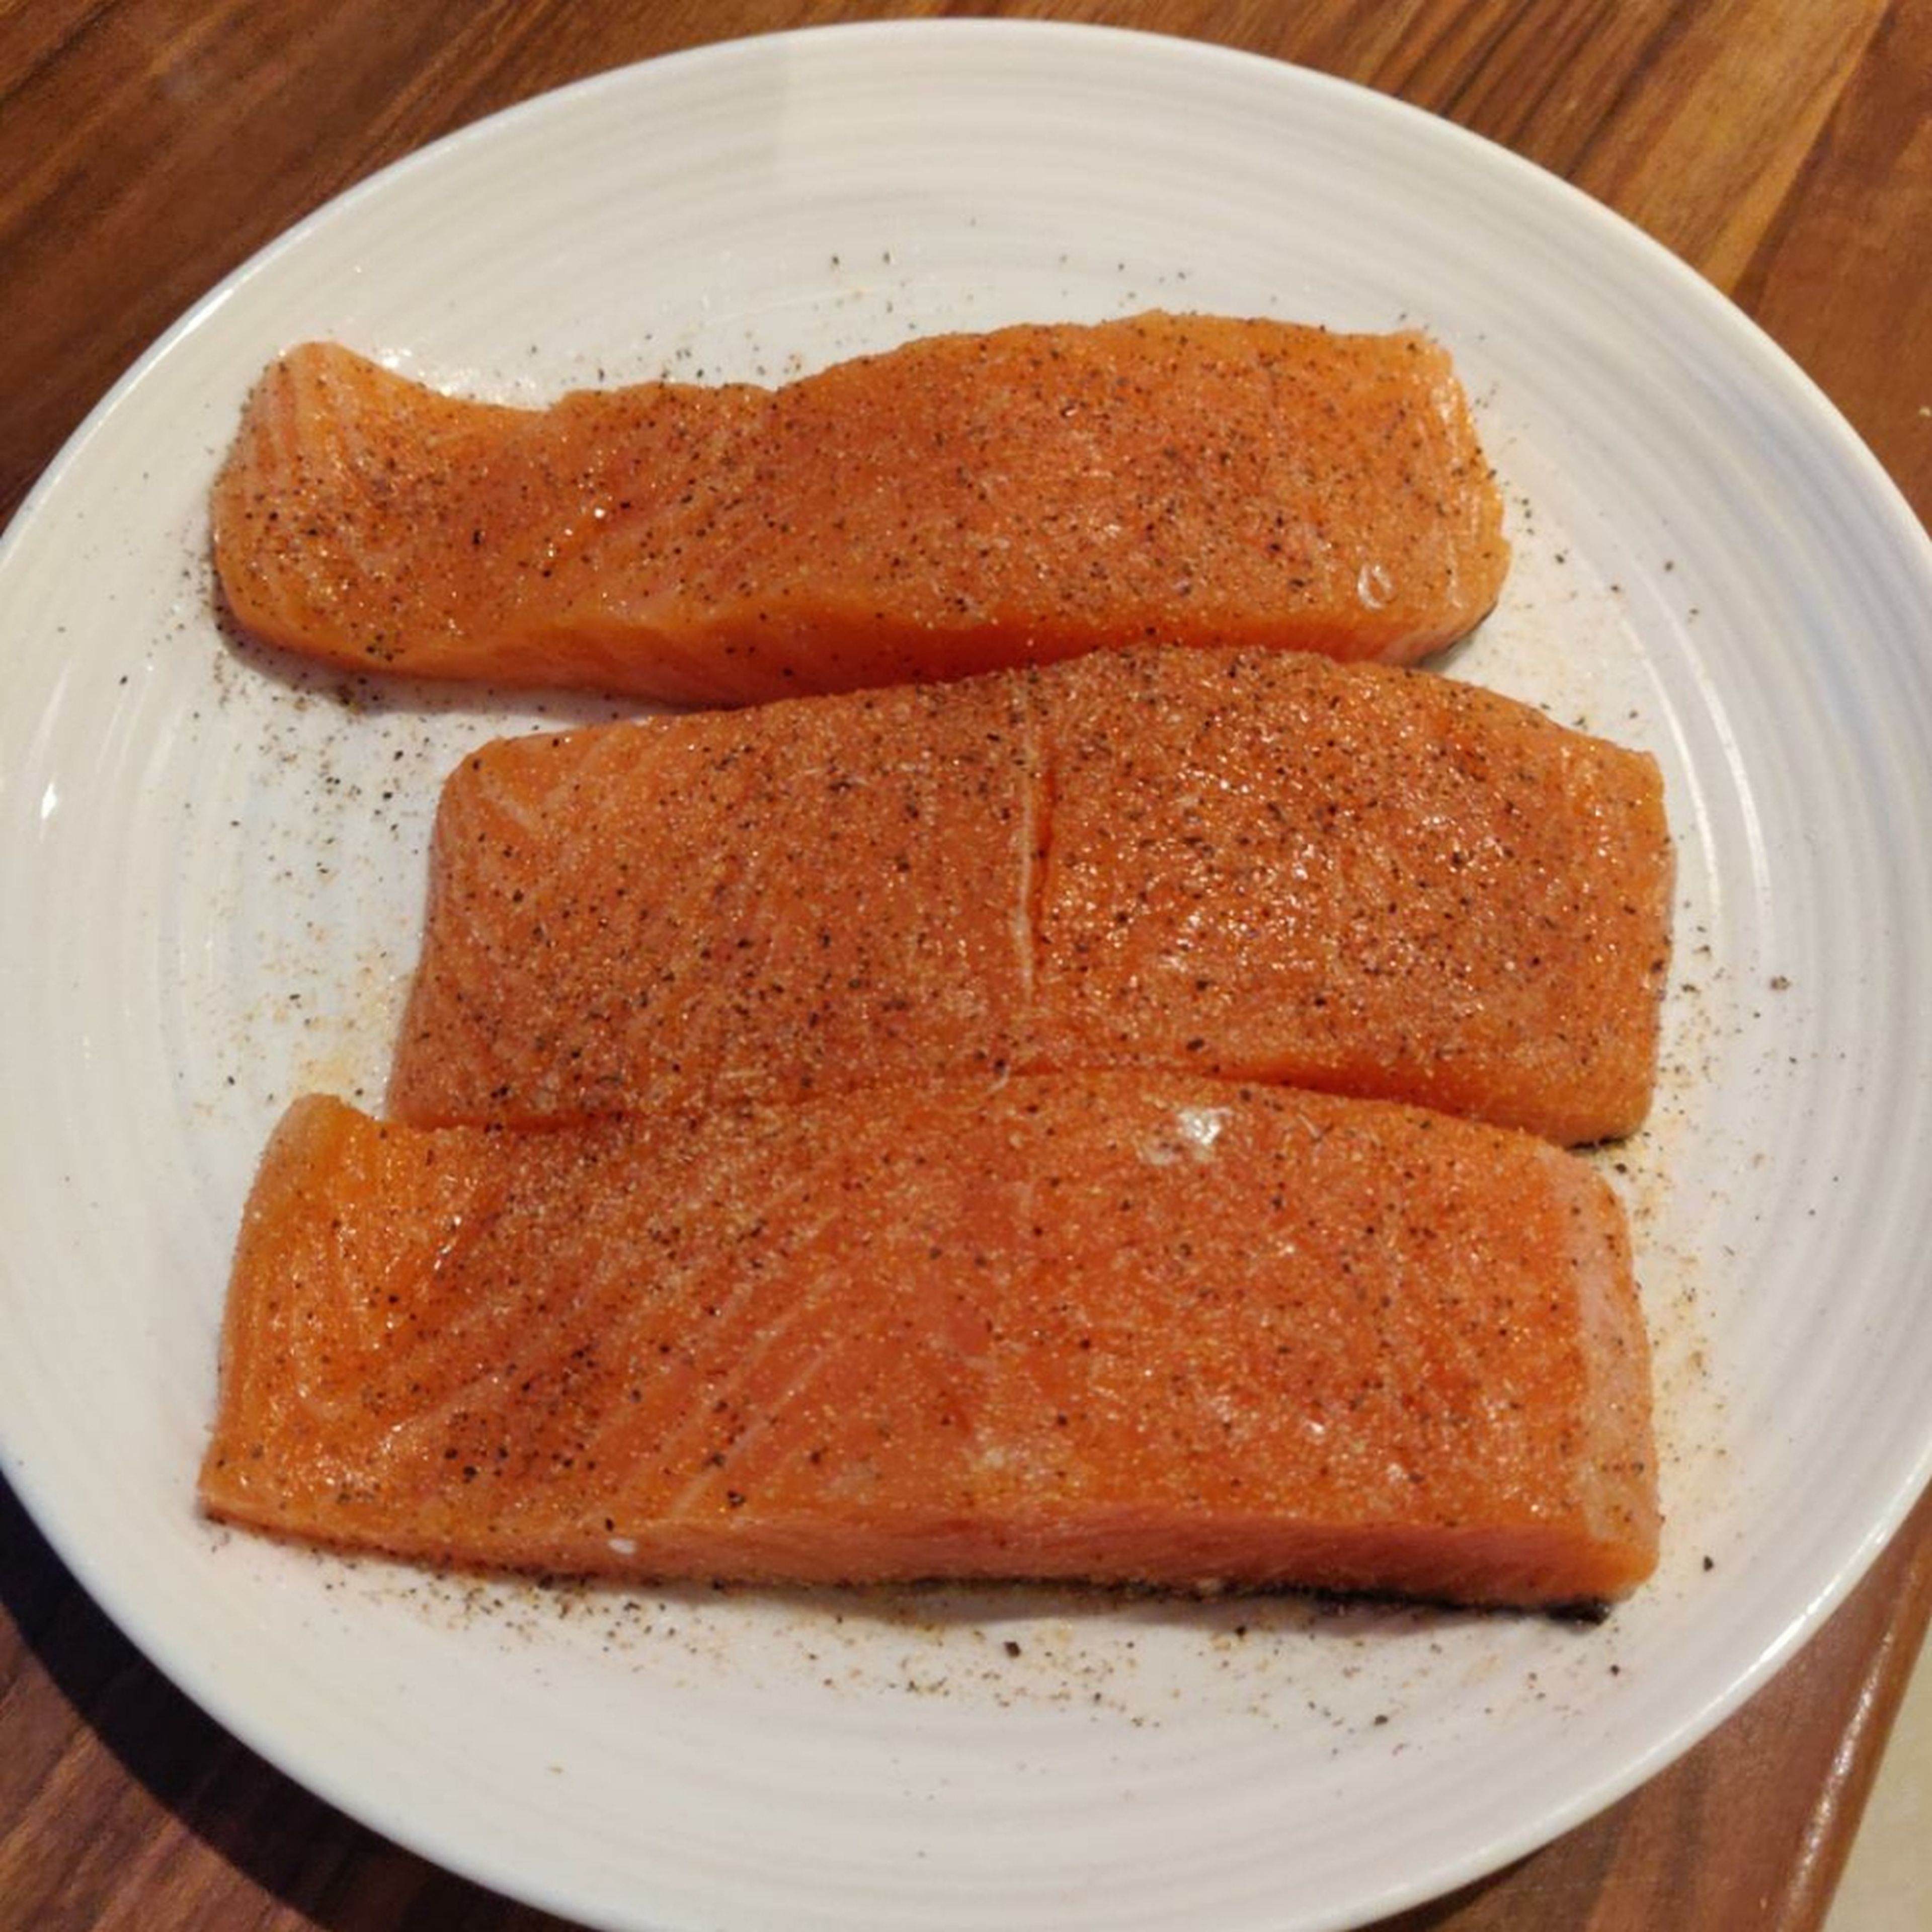 Season salmon fillets with salt, pepper and garlic powder. Allow to marinate for 30 mins.